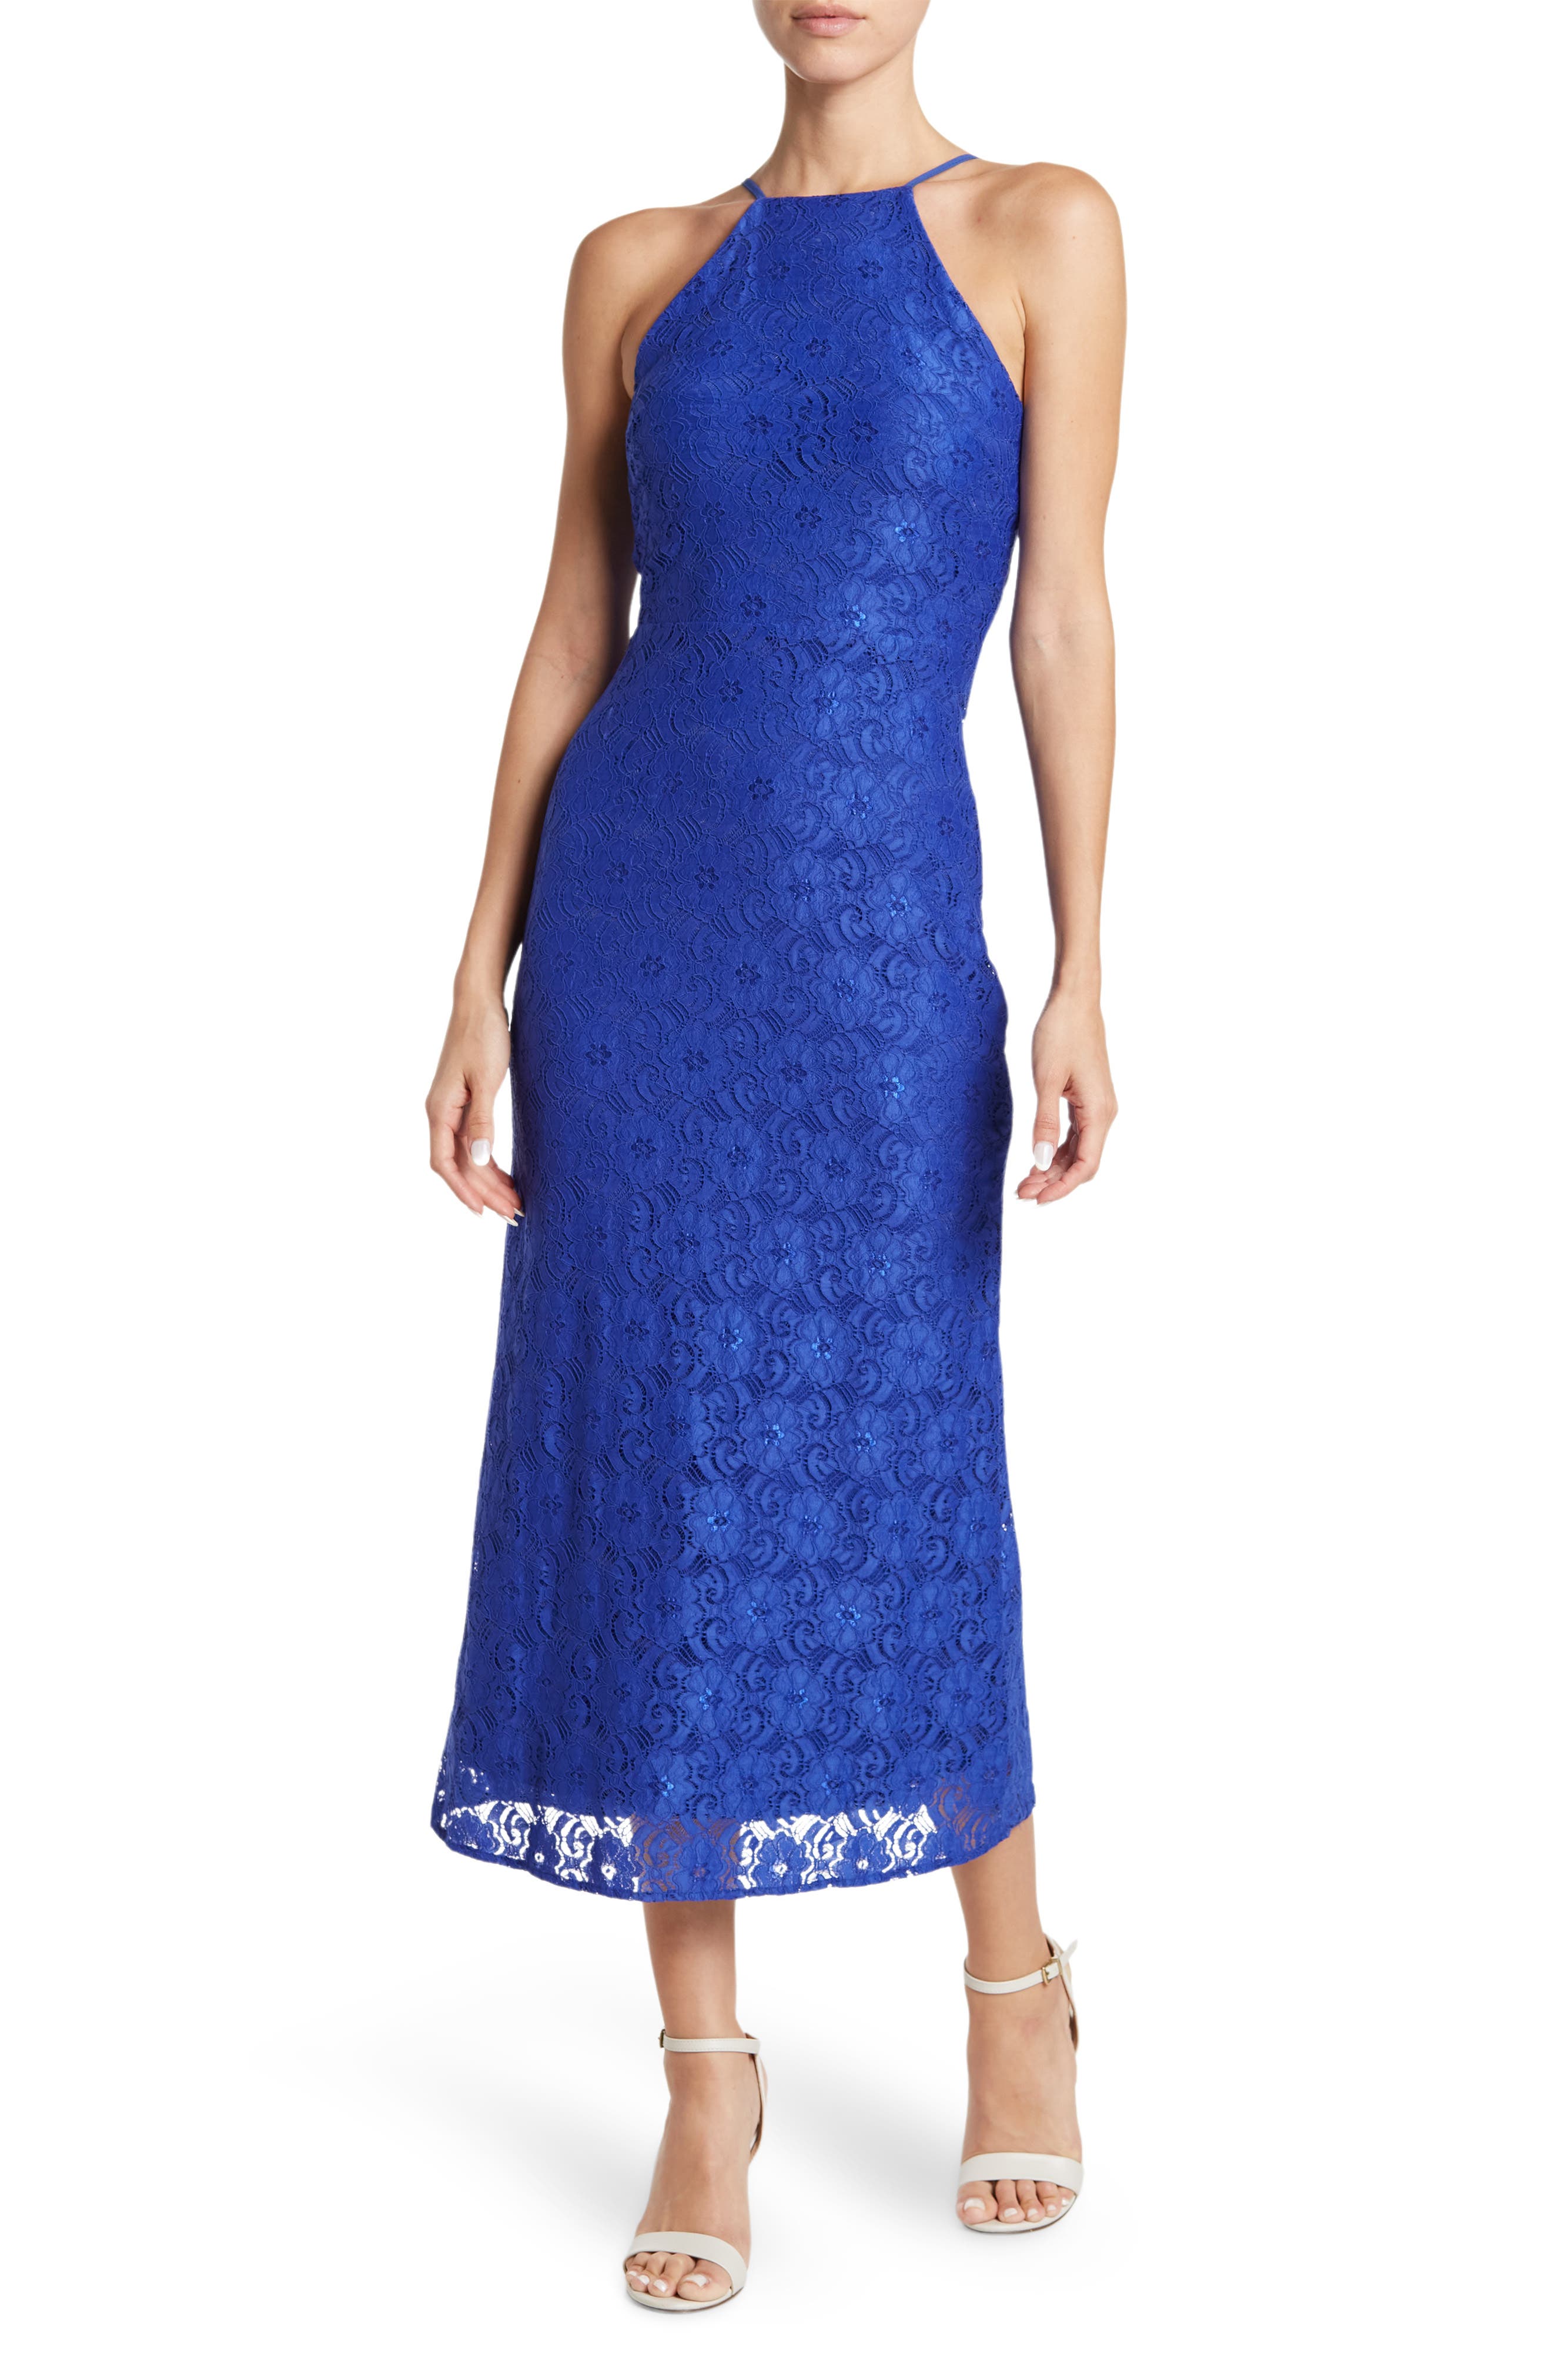 Blue Cocktail ☀ Party Dresses for Women ...